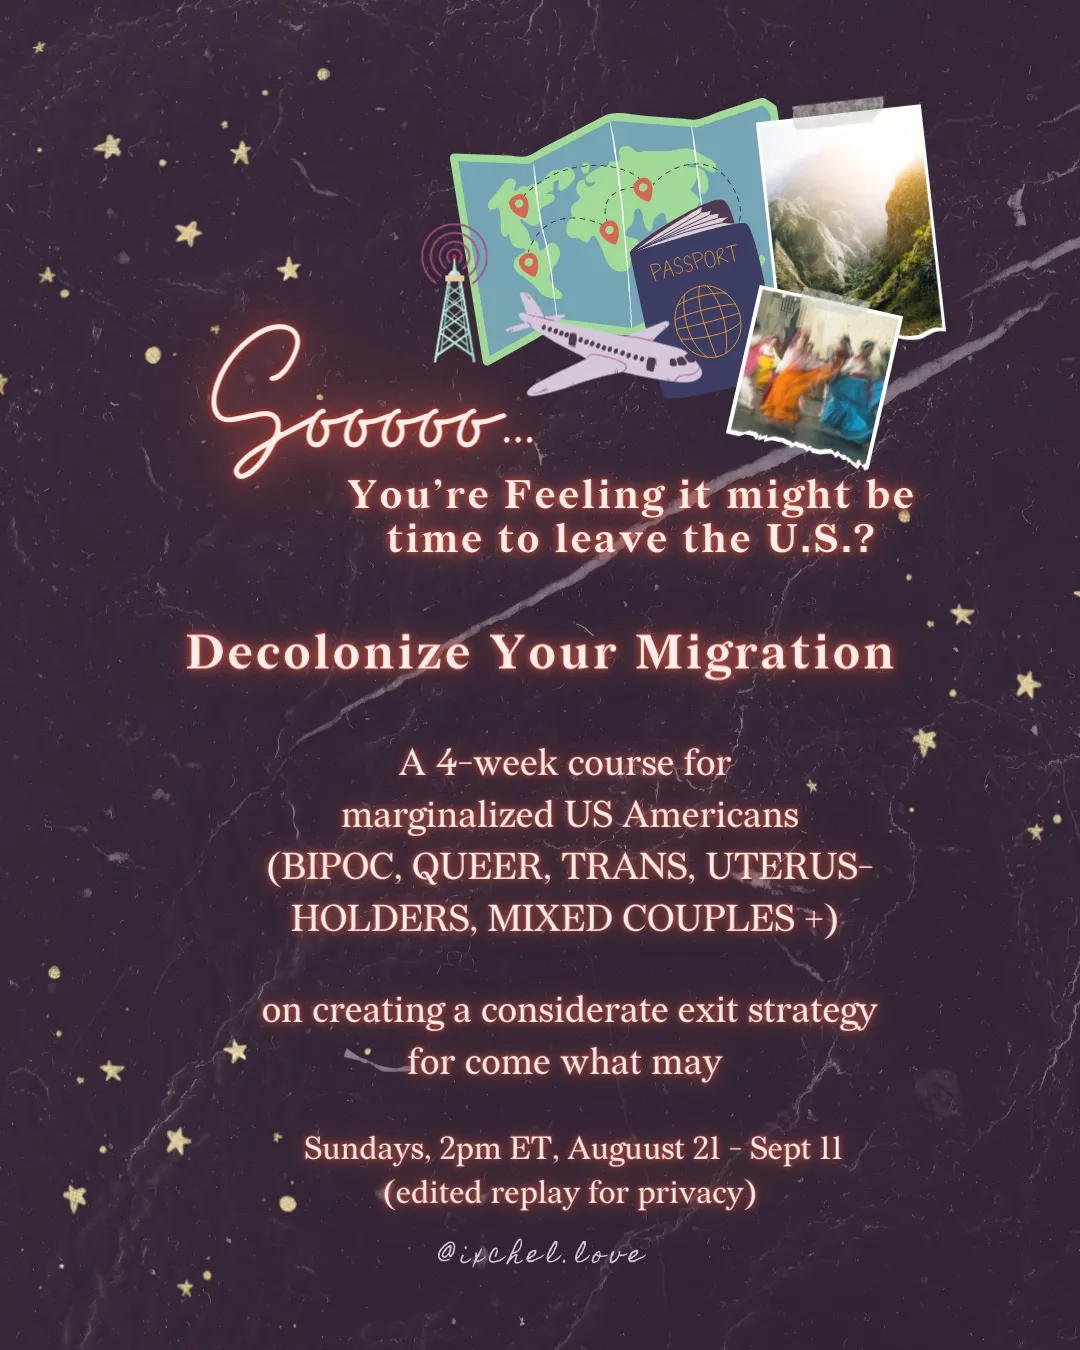 Sooooo… You’re Feeling it might be time to leave the U.S.? A 4-week course for marginalized US Americans  (BIPOC, QUEER, TRANS, UTERUS-HOLDERS, MIXED COUPLES +)  on creating an exit strategy for come what may  Ixchel is a former Petaluma, California Vice Mayor that migrated South in 2016 to what became an oppressive dictatorship, where during a political uprising they were undocumented and unable to leave for over 2 years. Hear their story and learn from their struggles in this private course and Telegram group.   Sundays, 2pm ET, August 21 - Sept 11 (edited replay for privacy)  Plus a private and secure Telegram group for follow up Q&A and reflections, connections. 